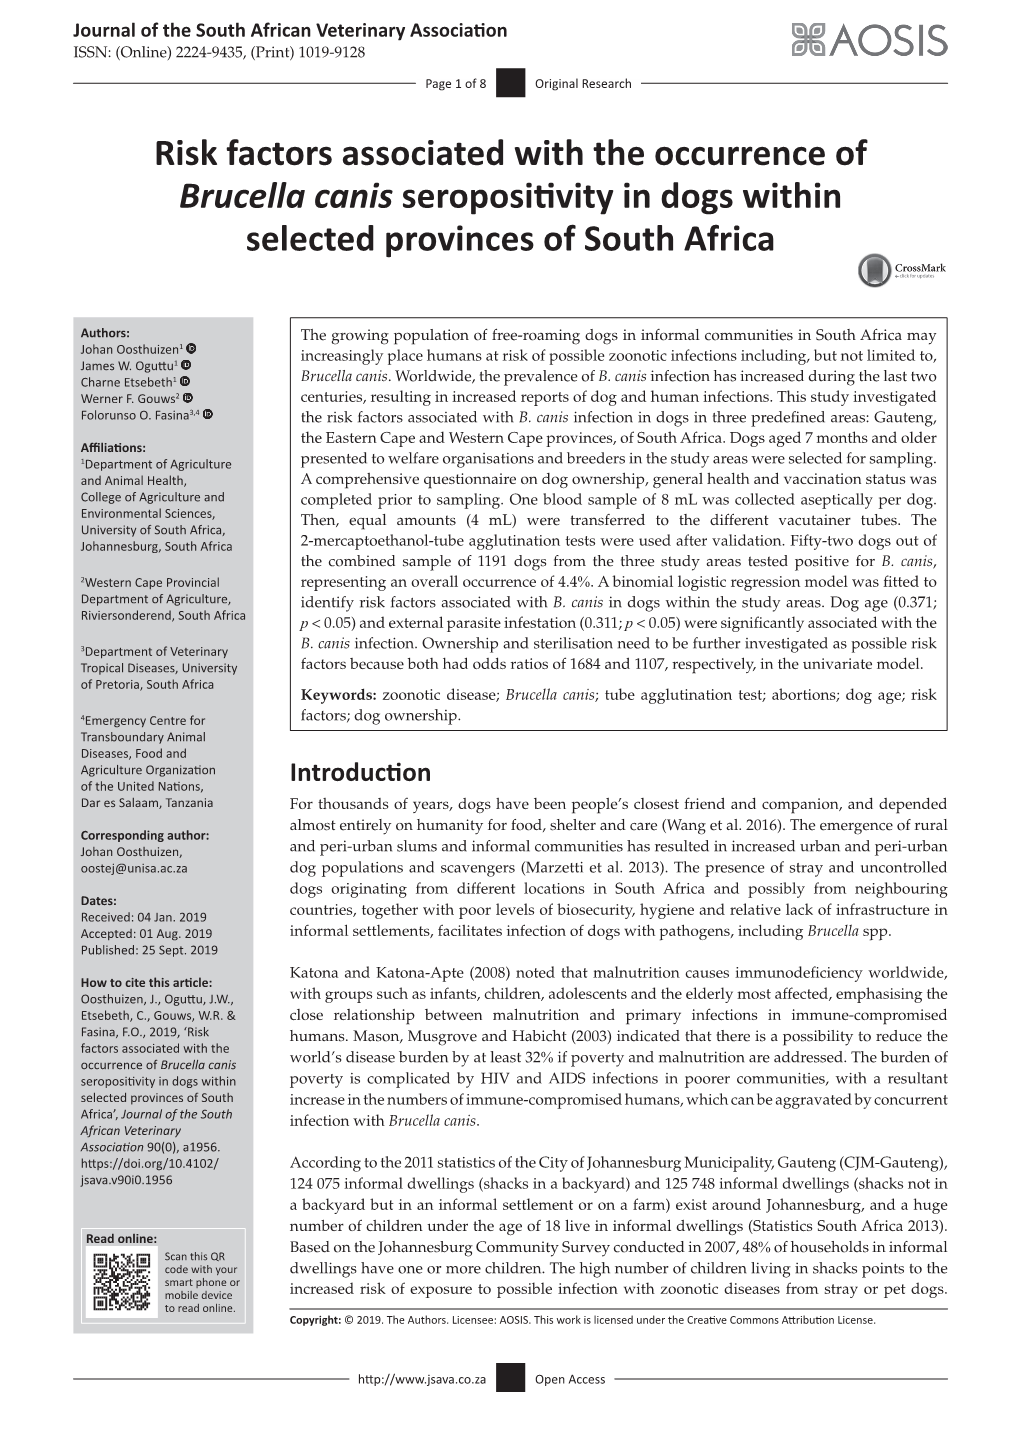 Risk Factors Associated with the Occurrence of Brucella Canis Seropositivity in Dogs Within Selected Provinces of South Africa